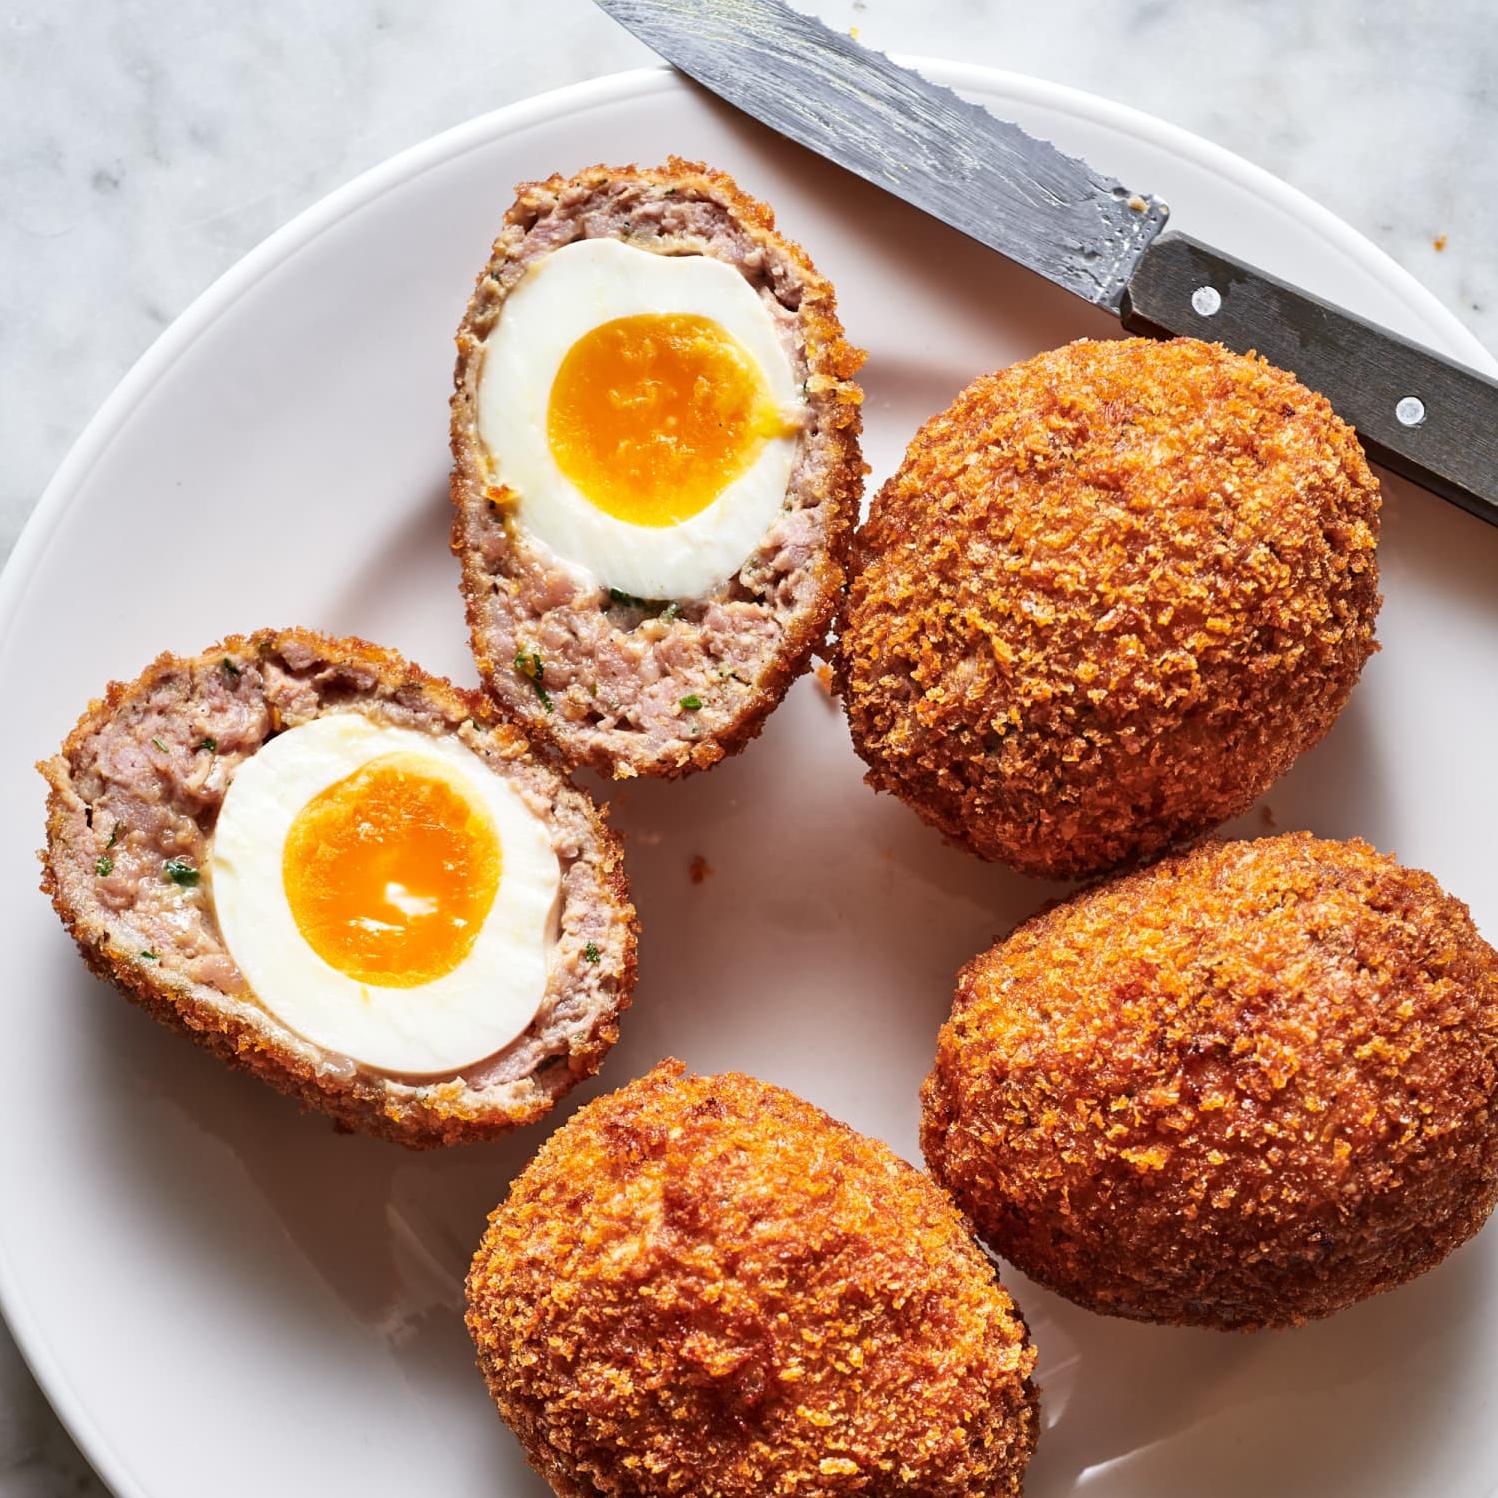  Close your eyes, take a bite, and savor the flavors of Spiced Scotch Eggs.